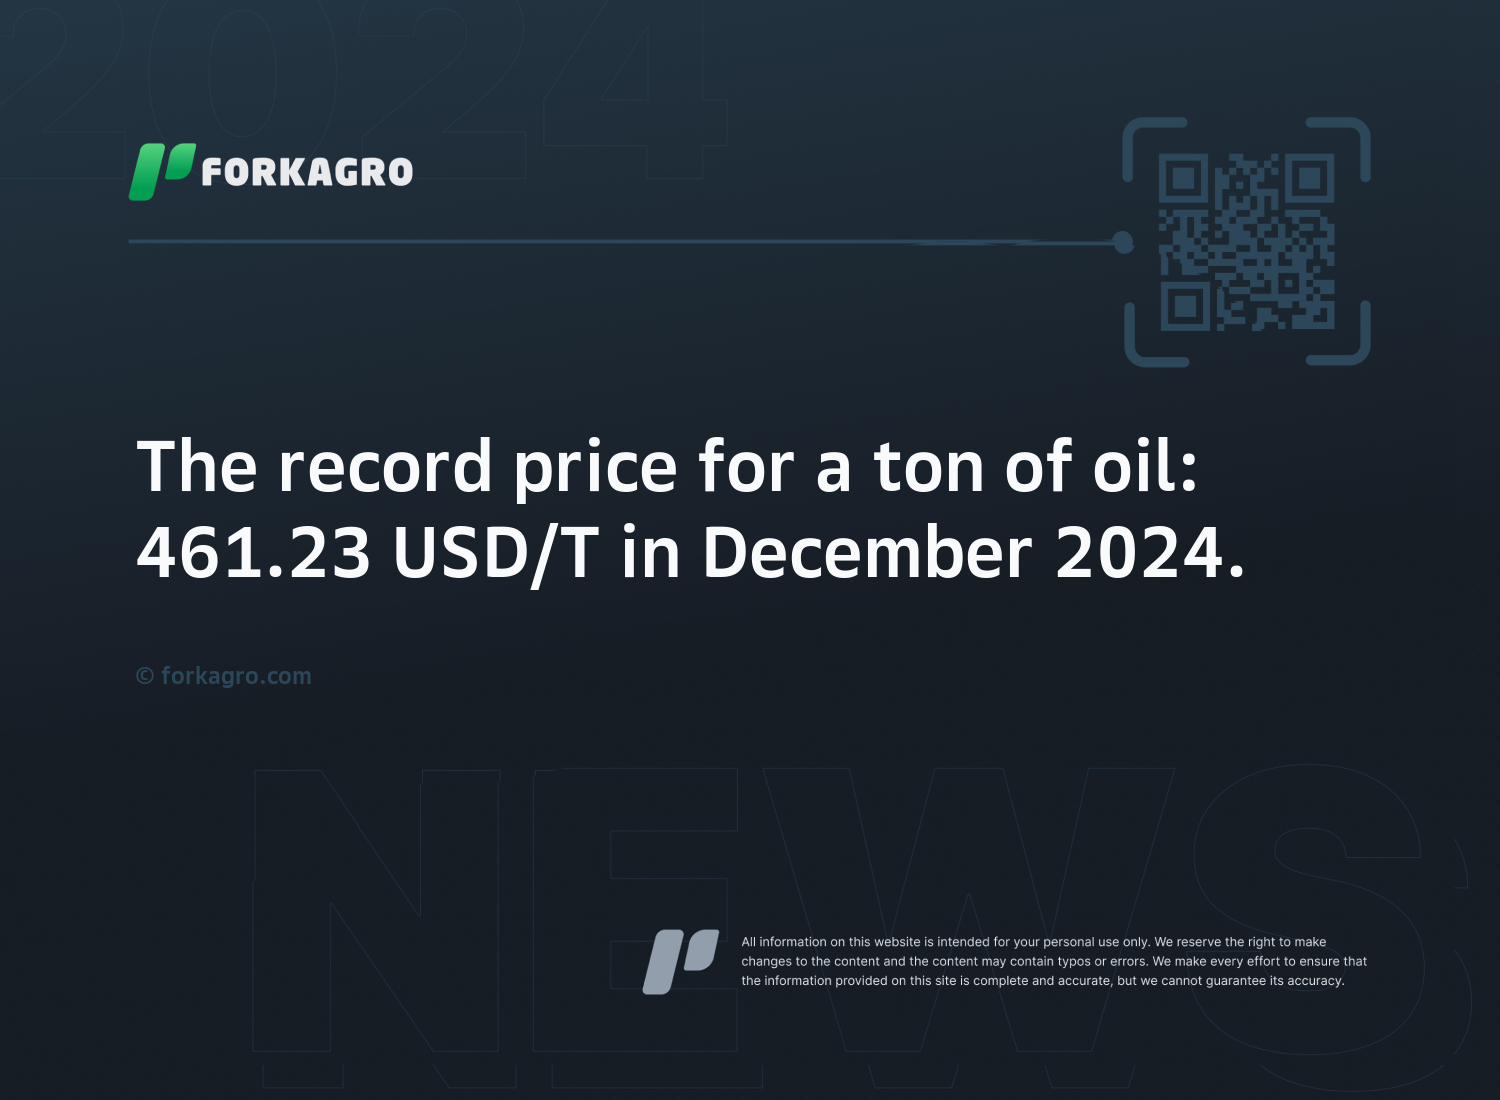 The record price for a ton of oil: 461.23 USD/T in December 2024.